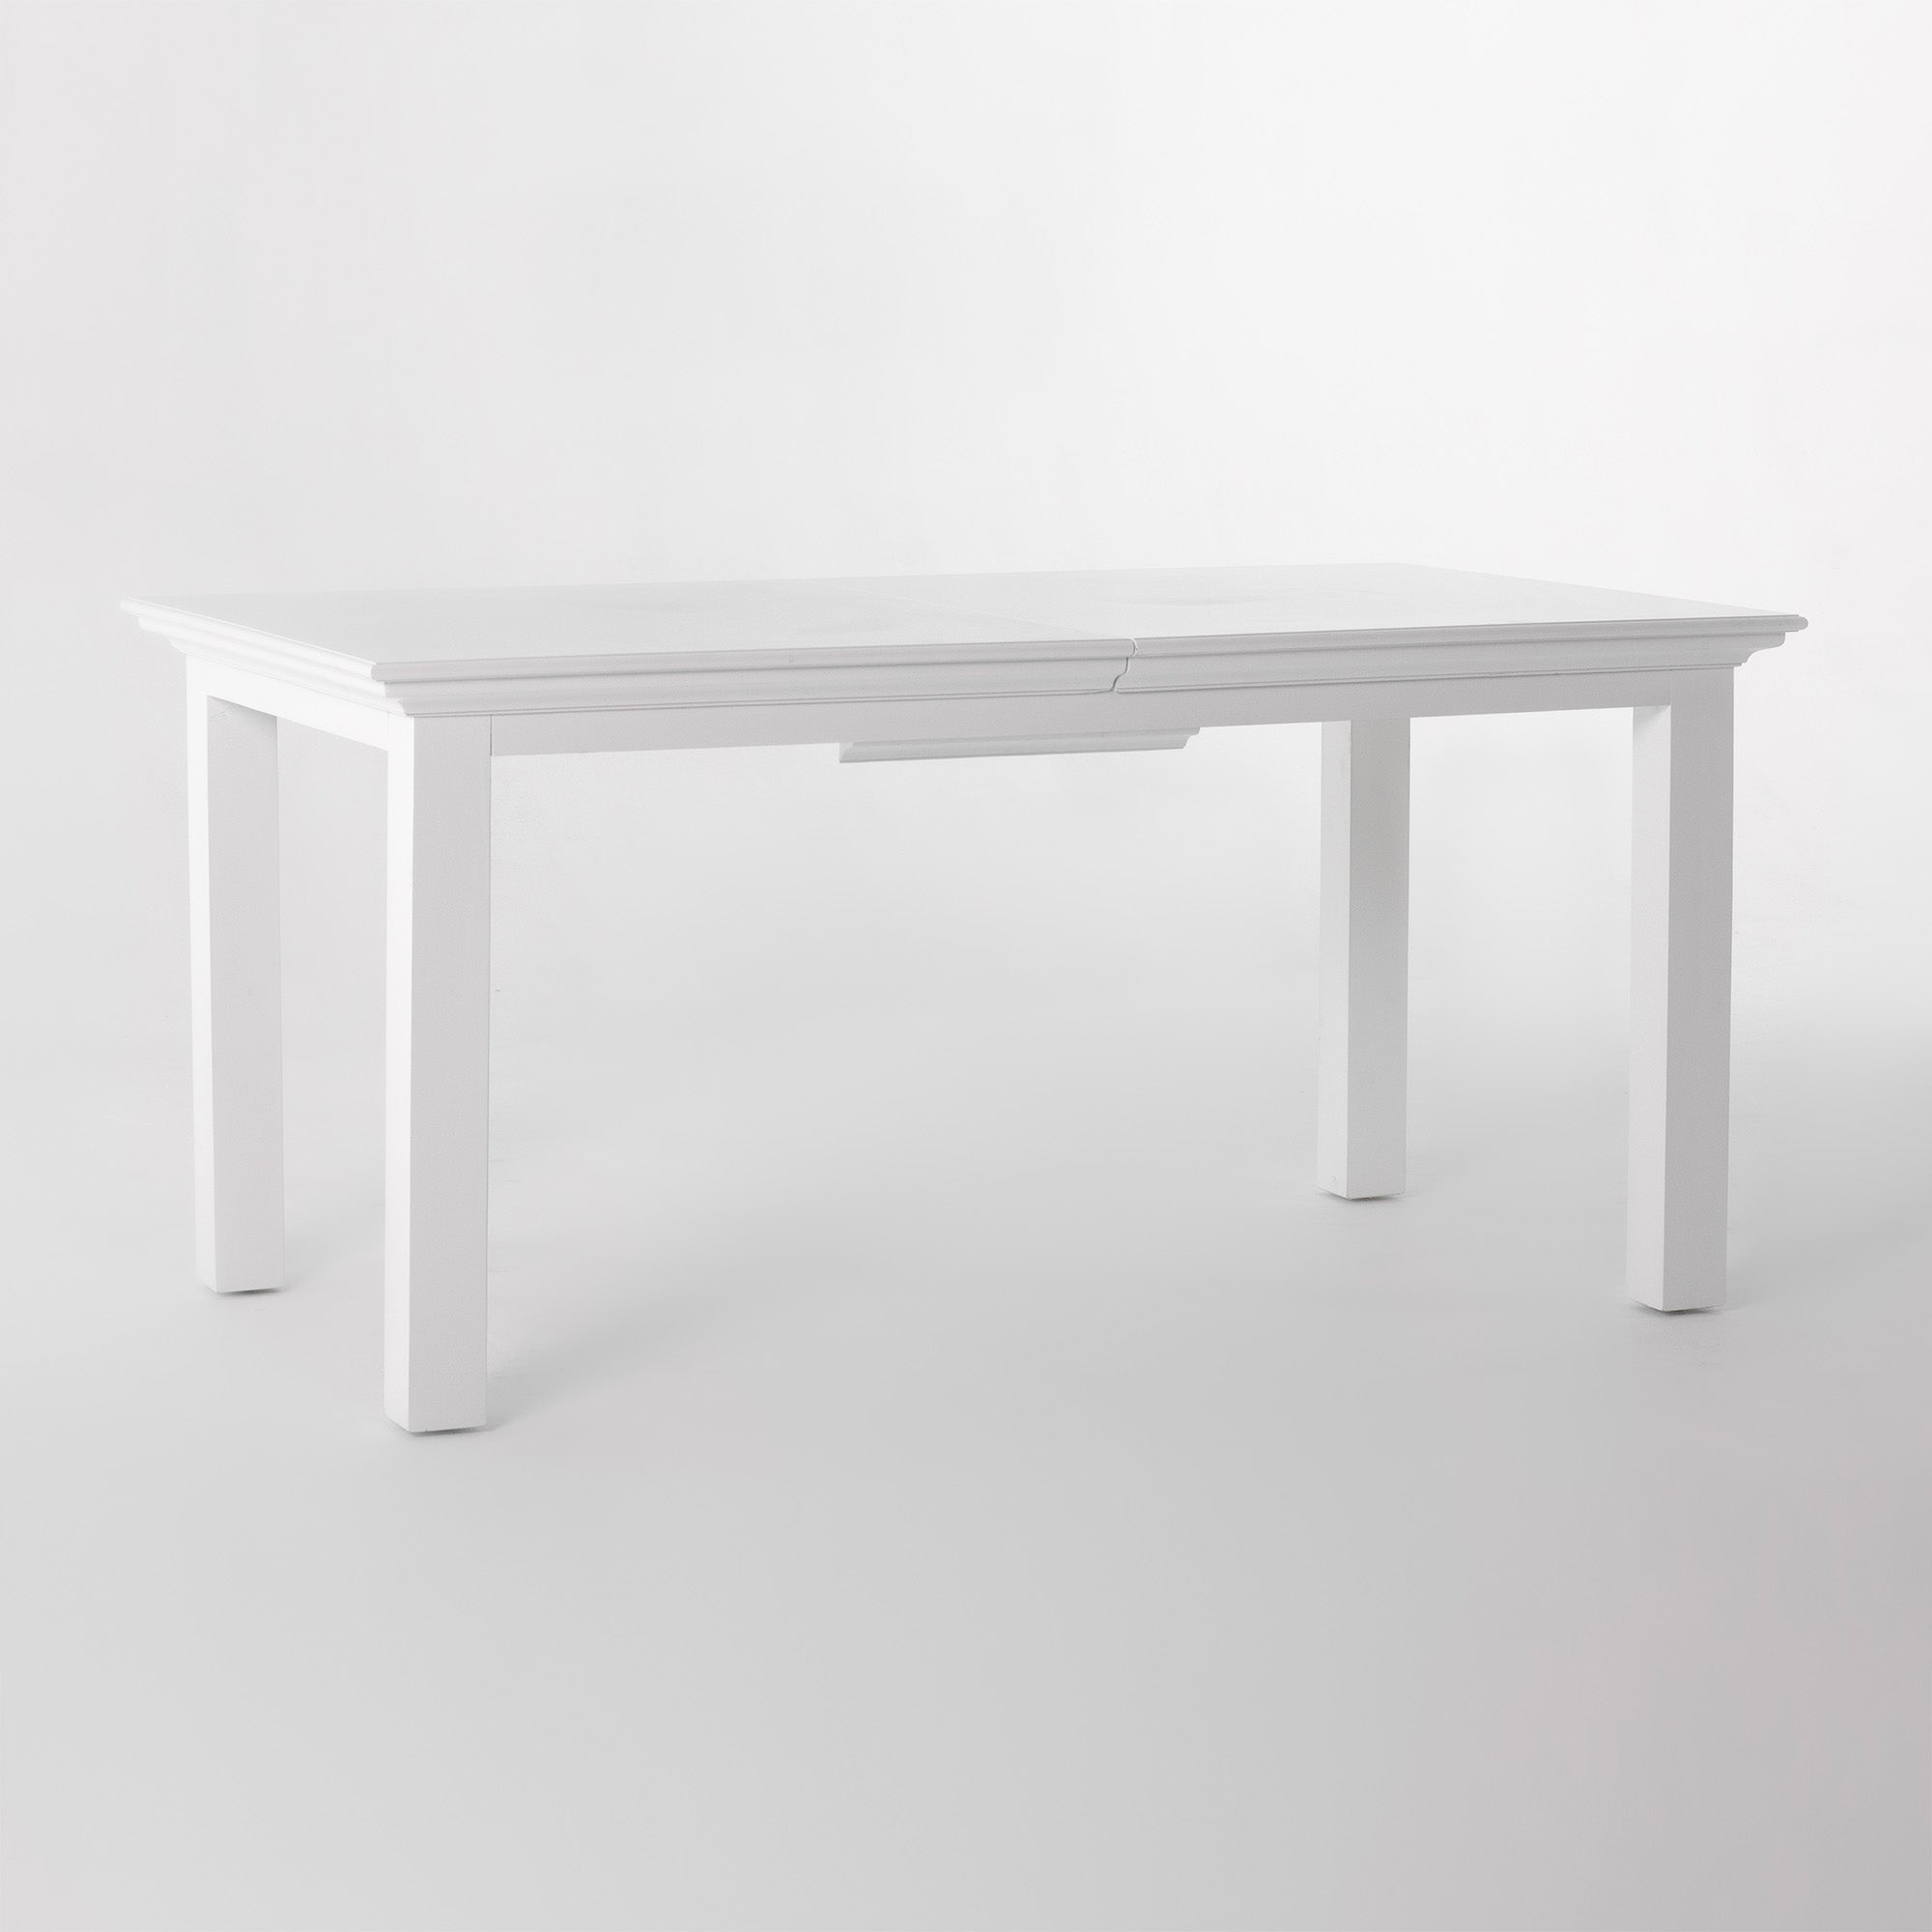 Halifax Coastal White Dining Extension Table